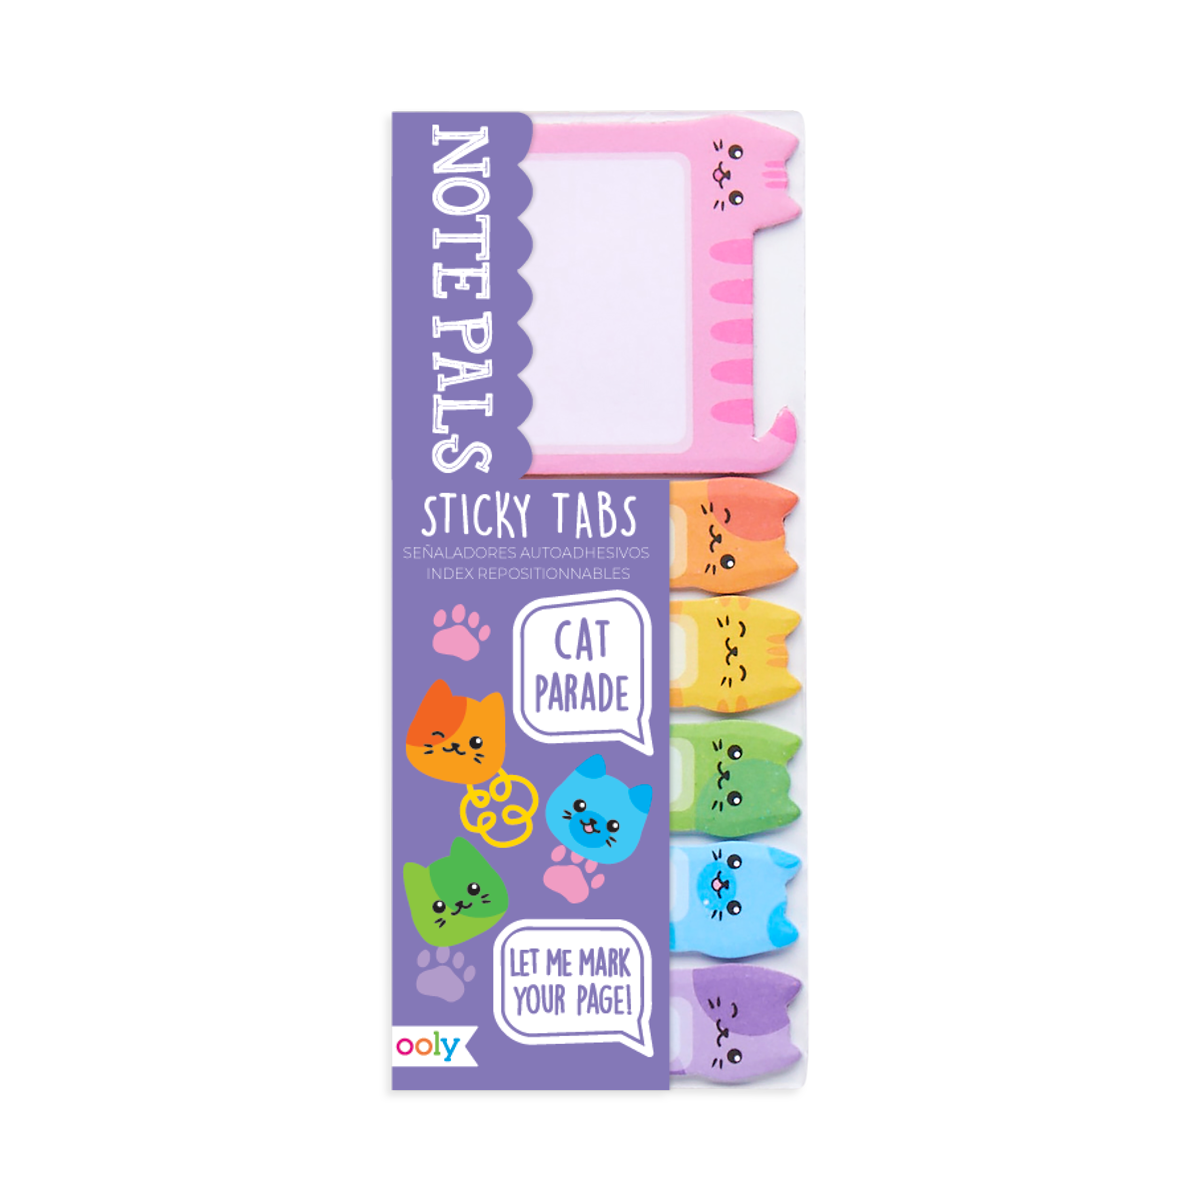 OOLY Note Pals Sticky Tabs - Cat Parade in packaging